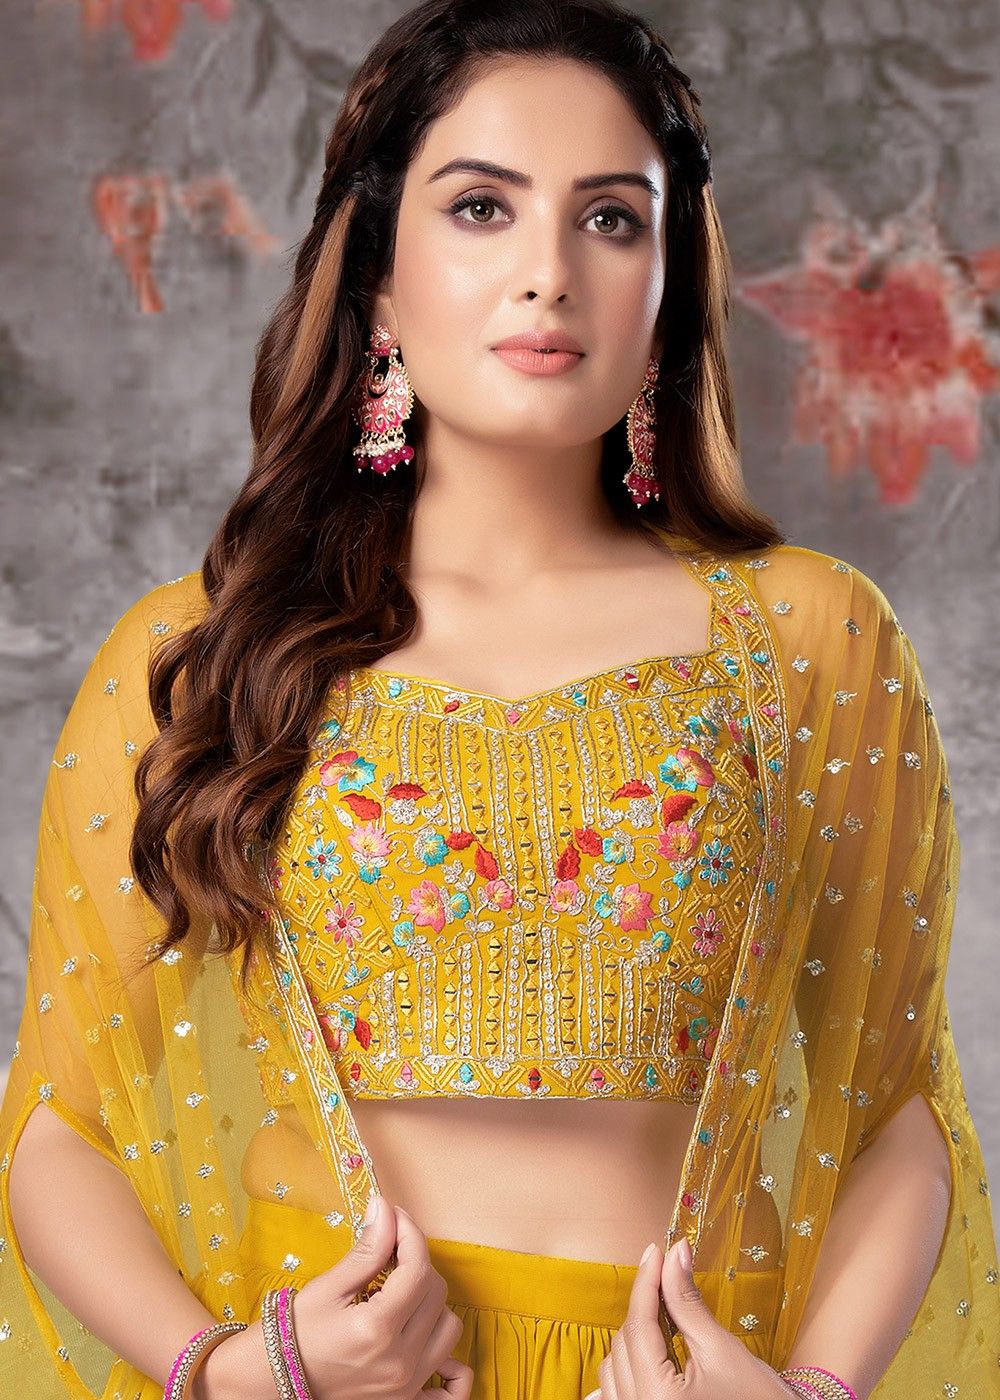 Khodal Textile Embroidered Semi Stitched Lehenga with Jacket - Buy Khodal  Textile Embroidered Semi Stitched Lehenga with Jacket Online at Best Prices  in India | Flipkart.com